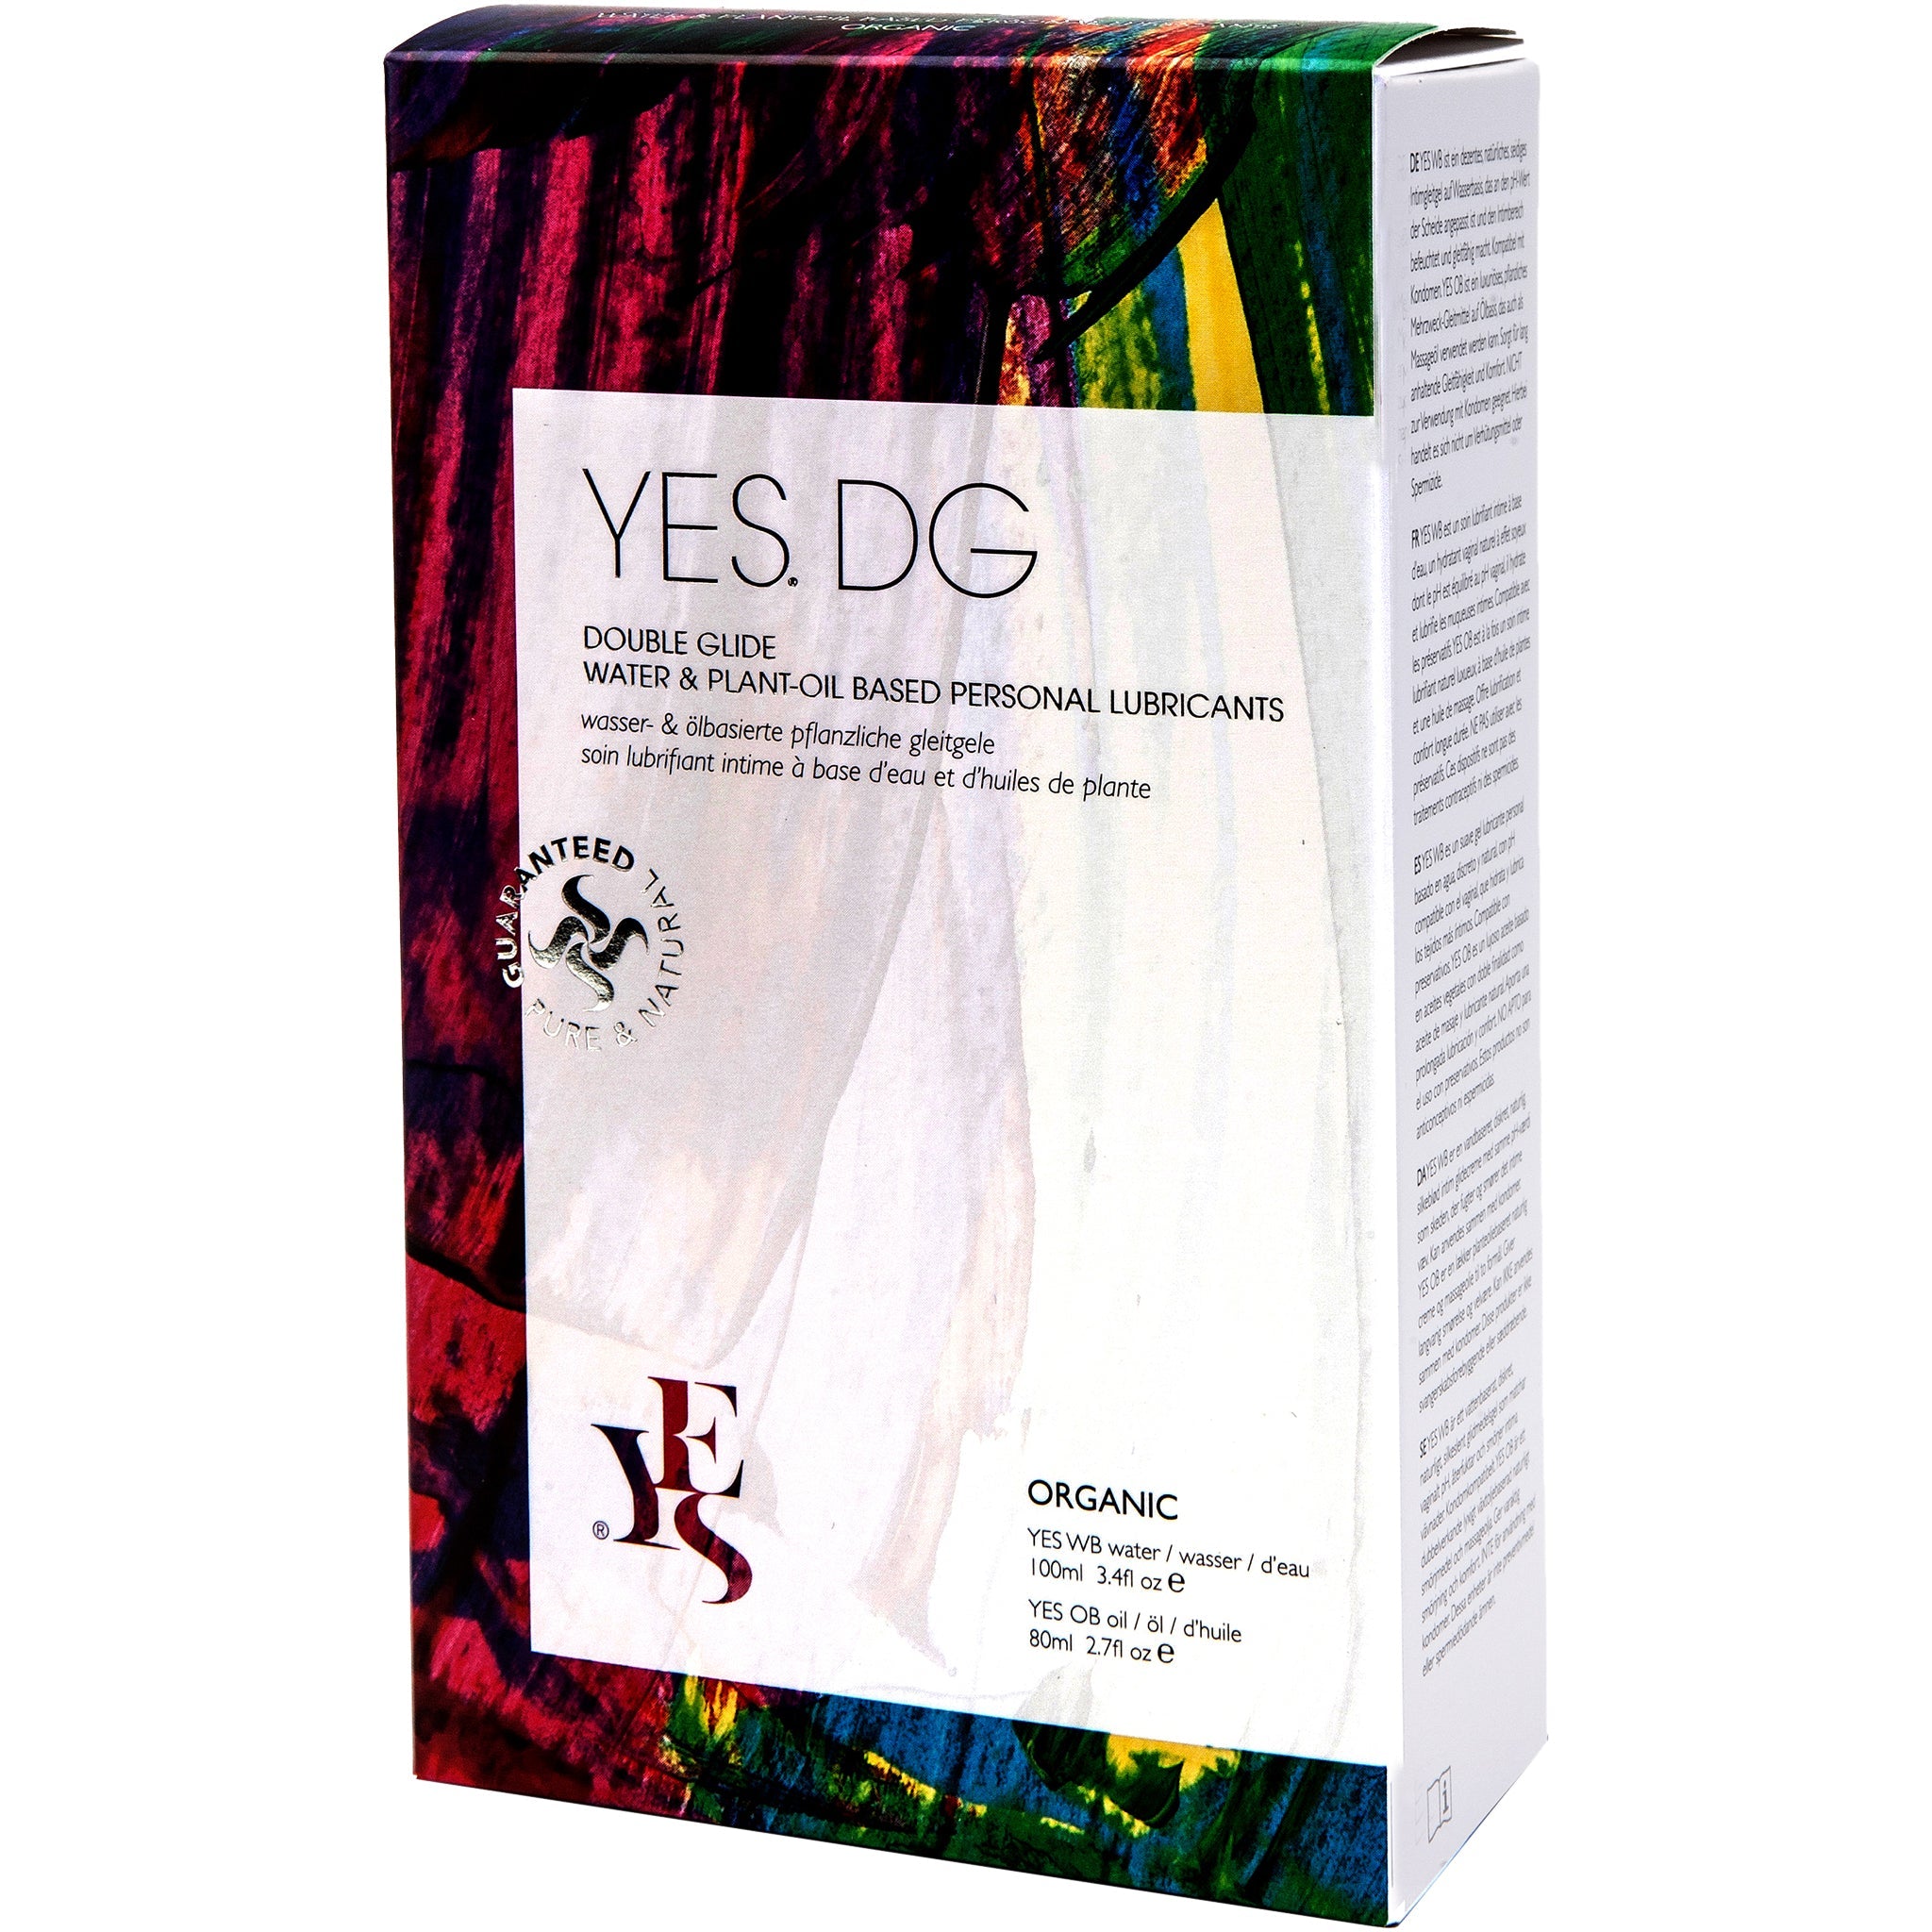 ***BACK SOON***YES® Double Glide Water & Plant Based Personal Lubricants - Worth £24